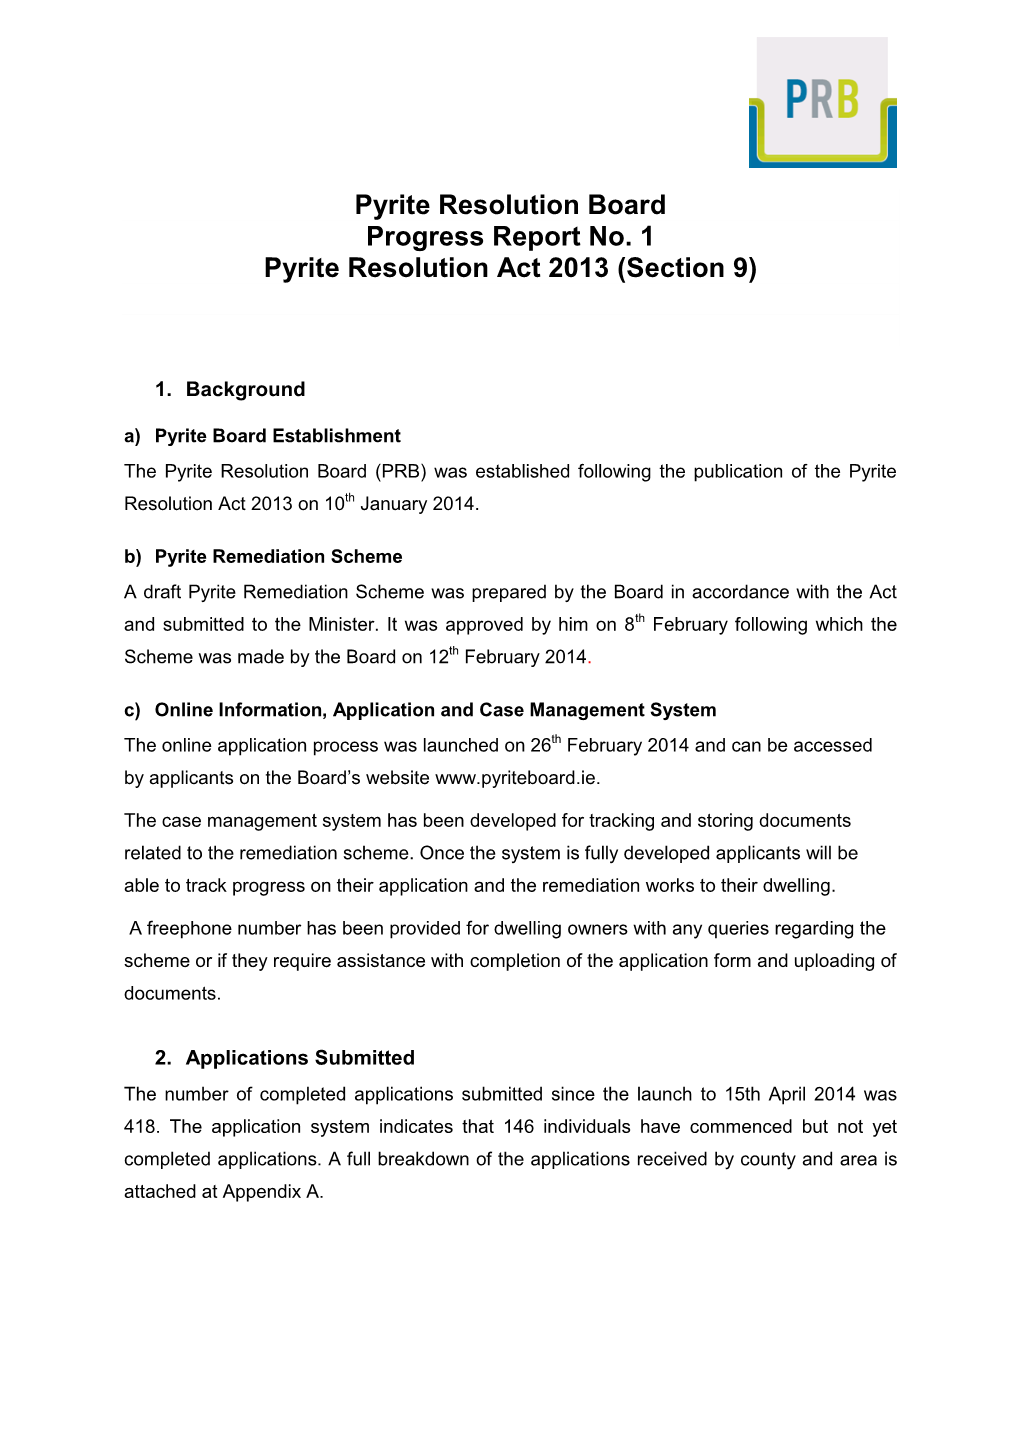 Pyrite Resolution Board Progress Report No. 1 Pyrite Resolution Act 2013 (Section 9)